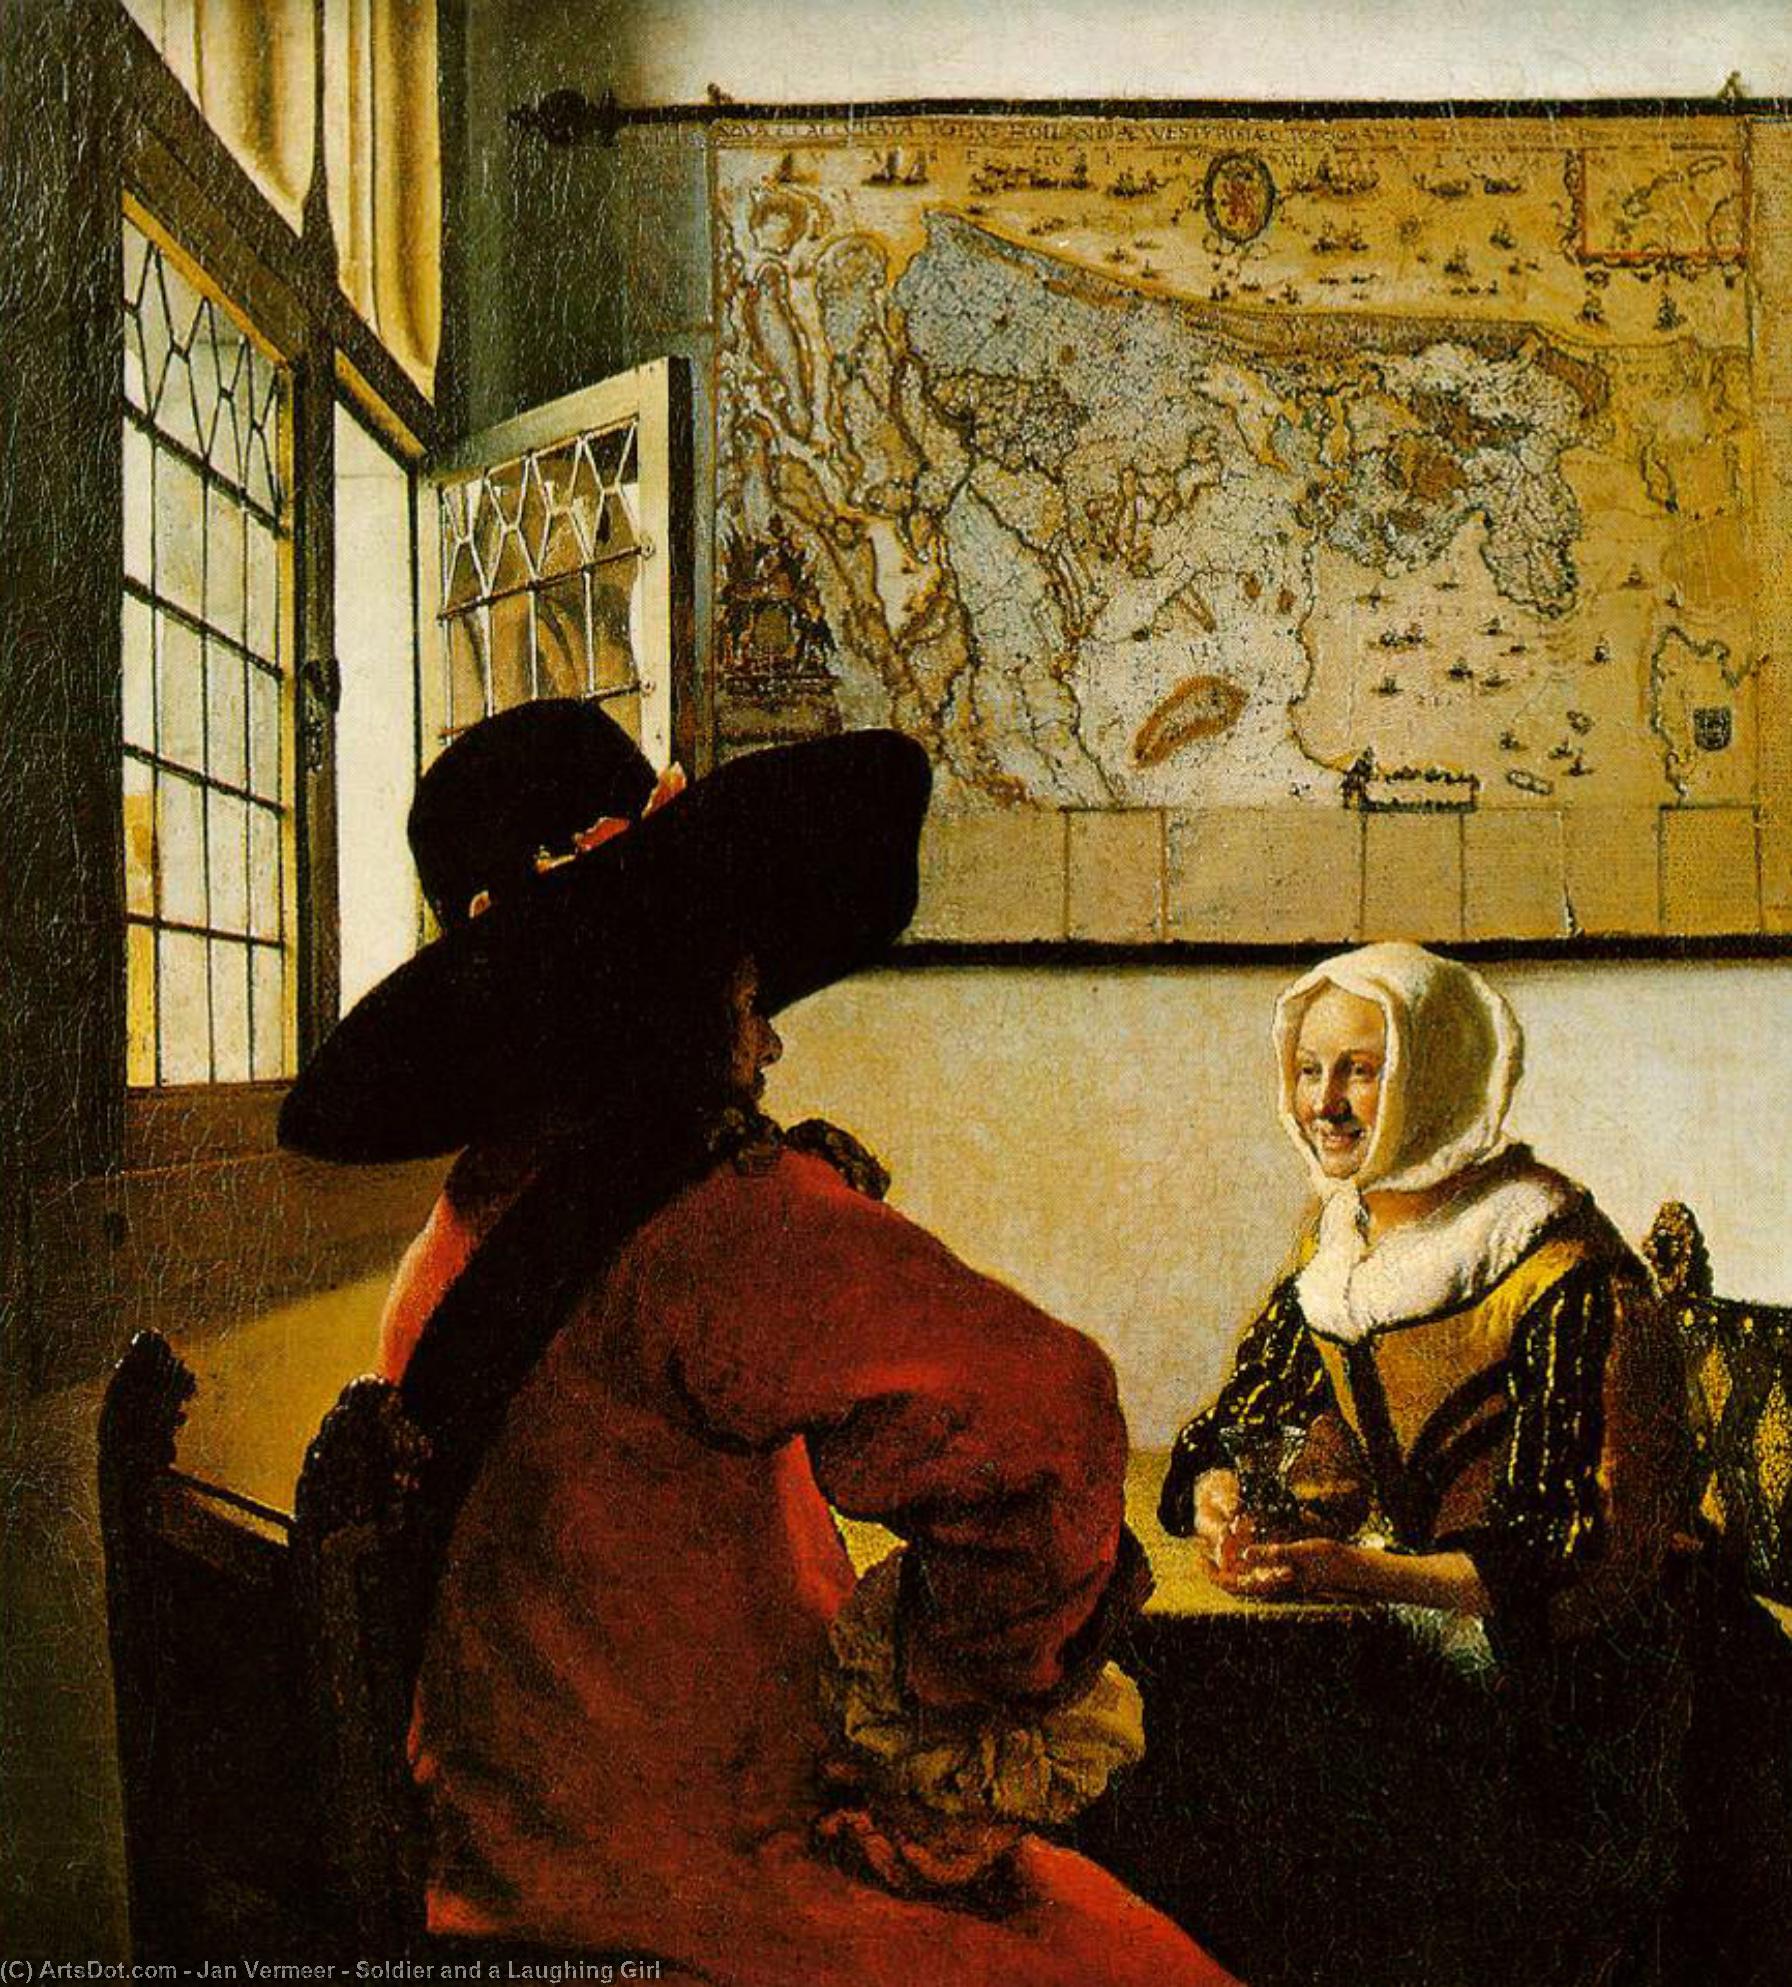 WikiOO.org - Encyclopedia of Fine Arts - Maalaus, taideteos Jan Vermeer - Soldier and a Laughing Girl